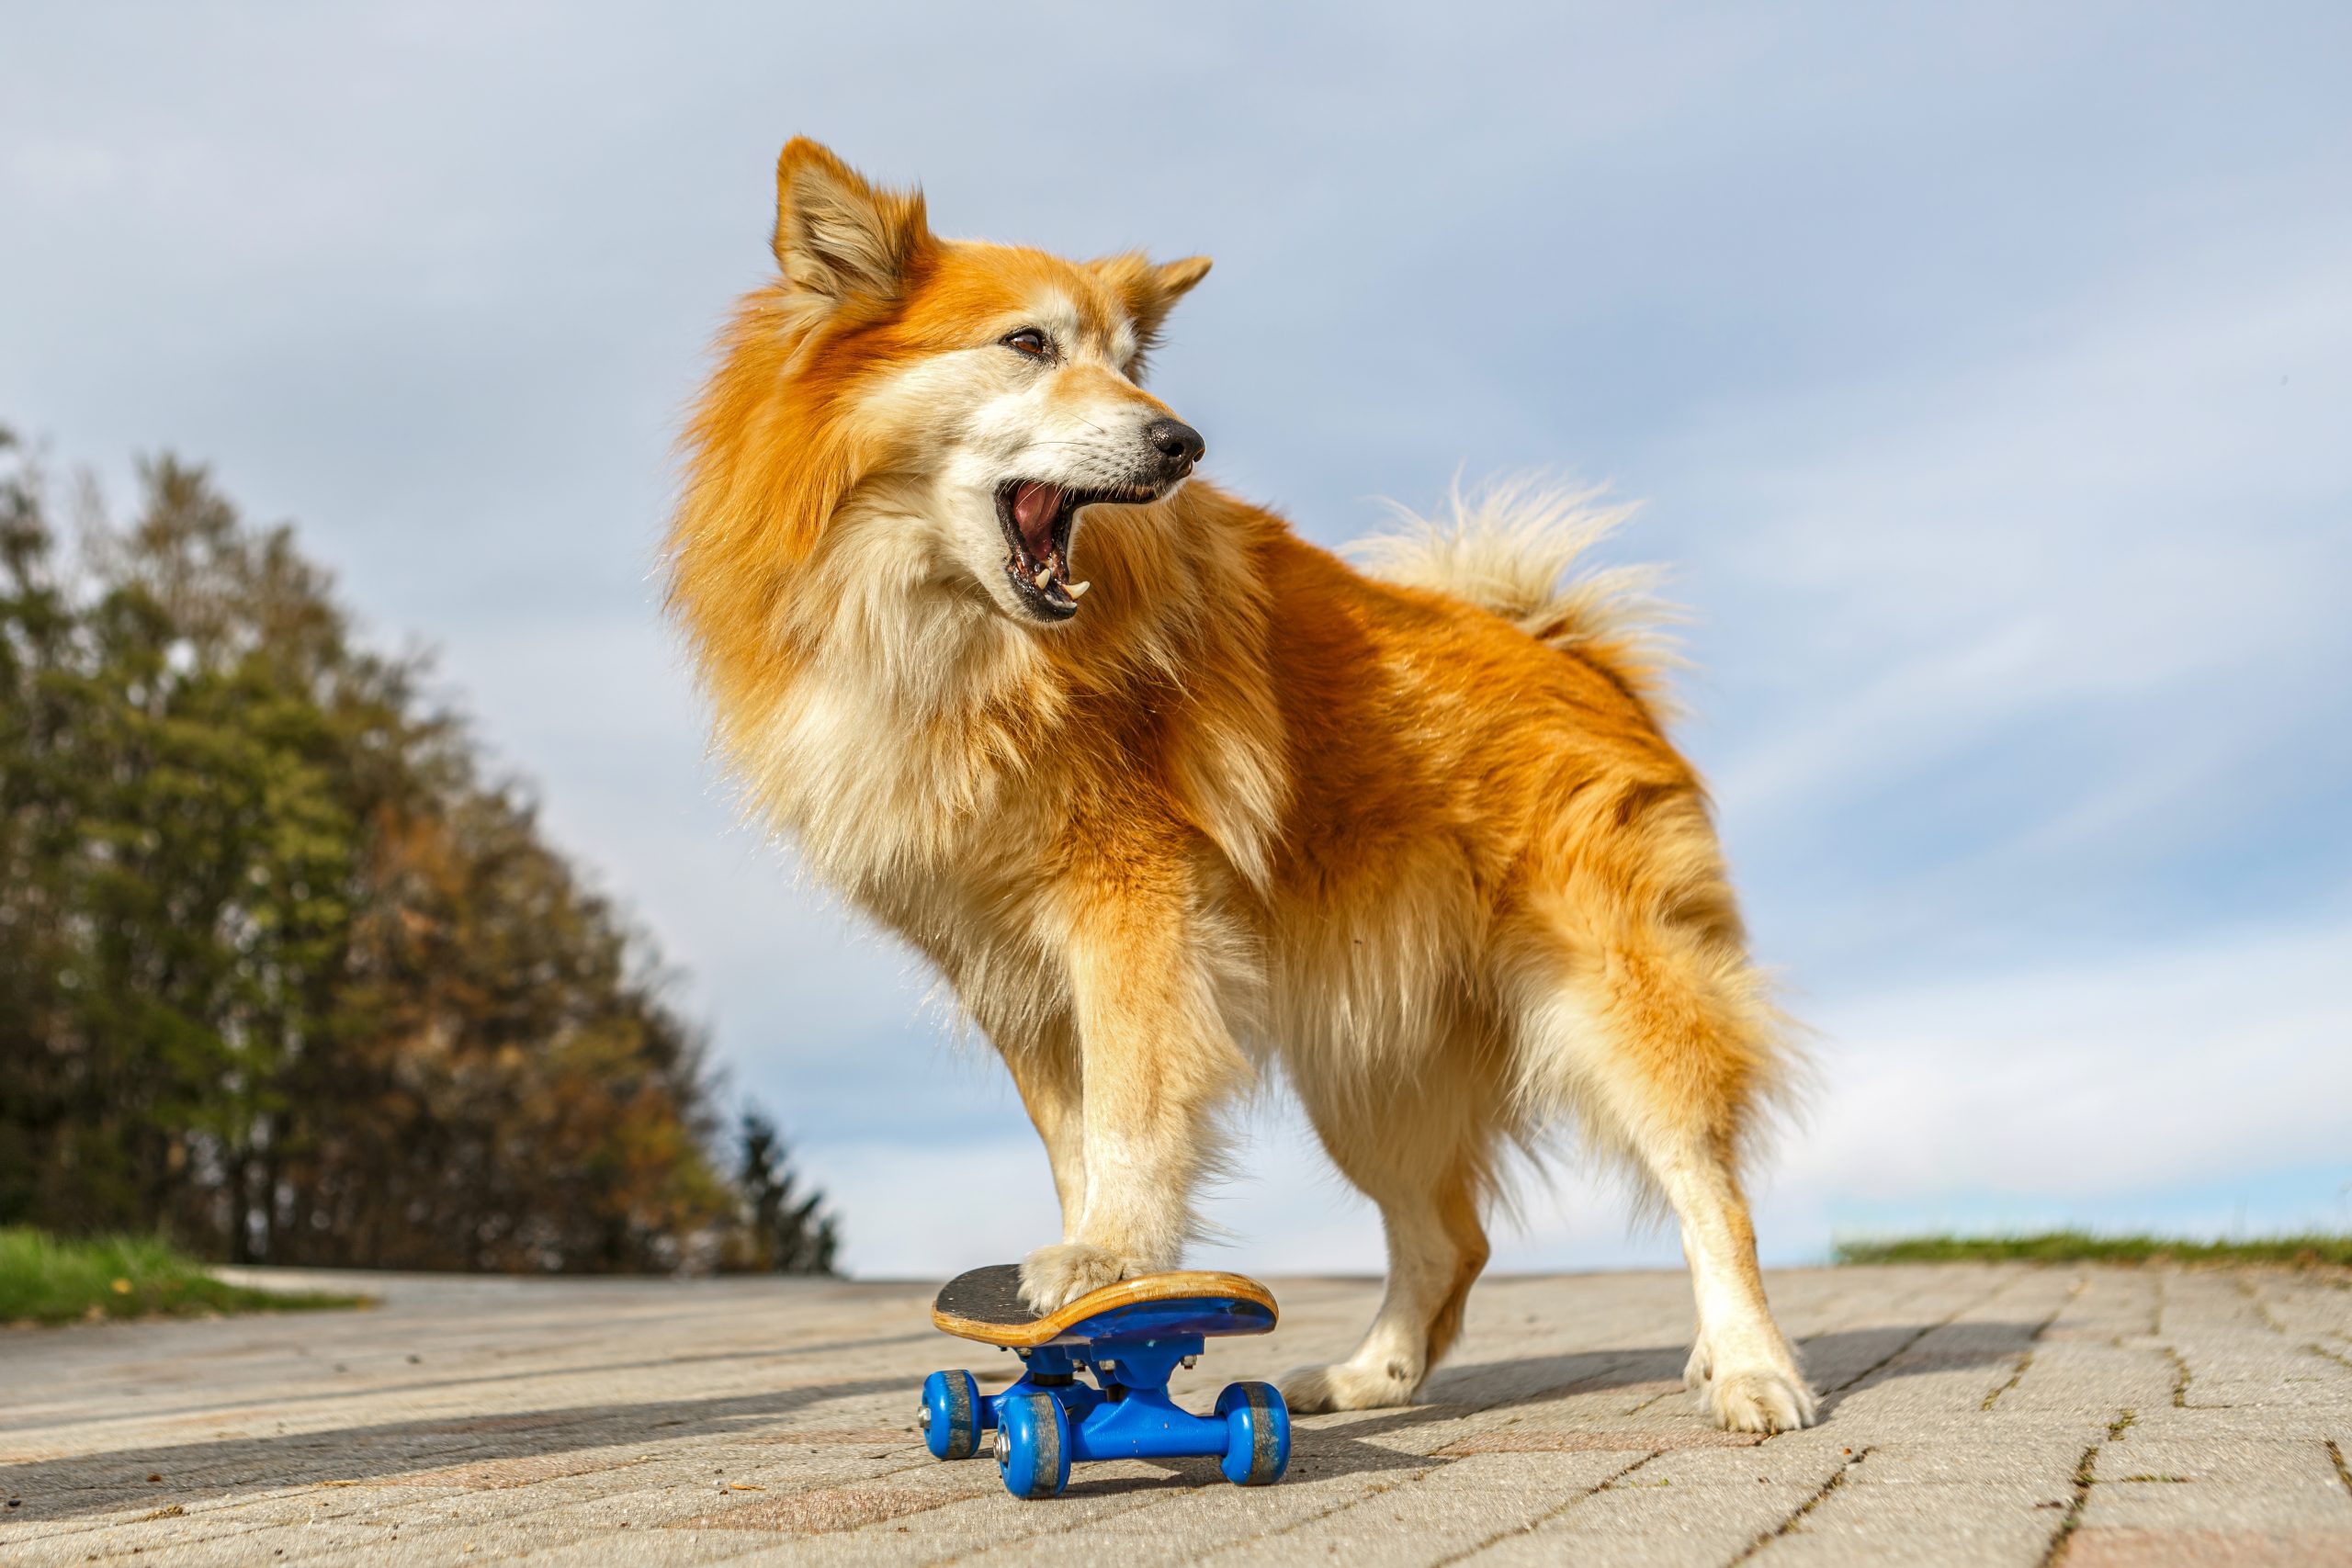 Portriat,Of,An,Male,Adult,Icelandic,Sheepdog,Posing,On,A